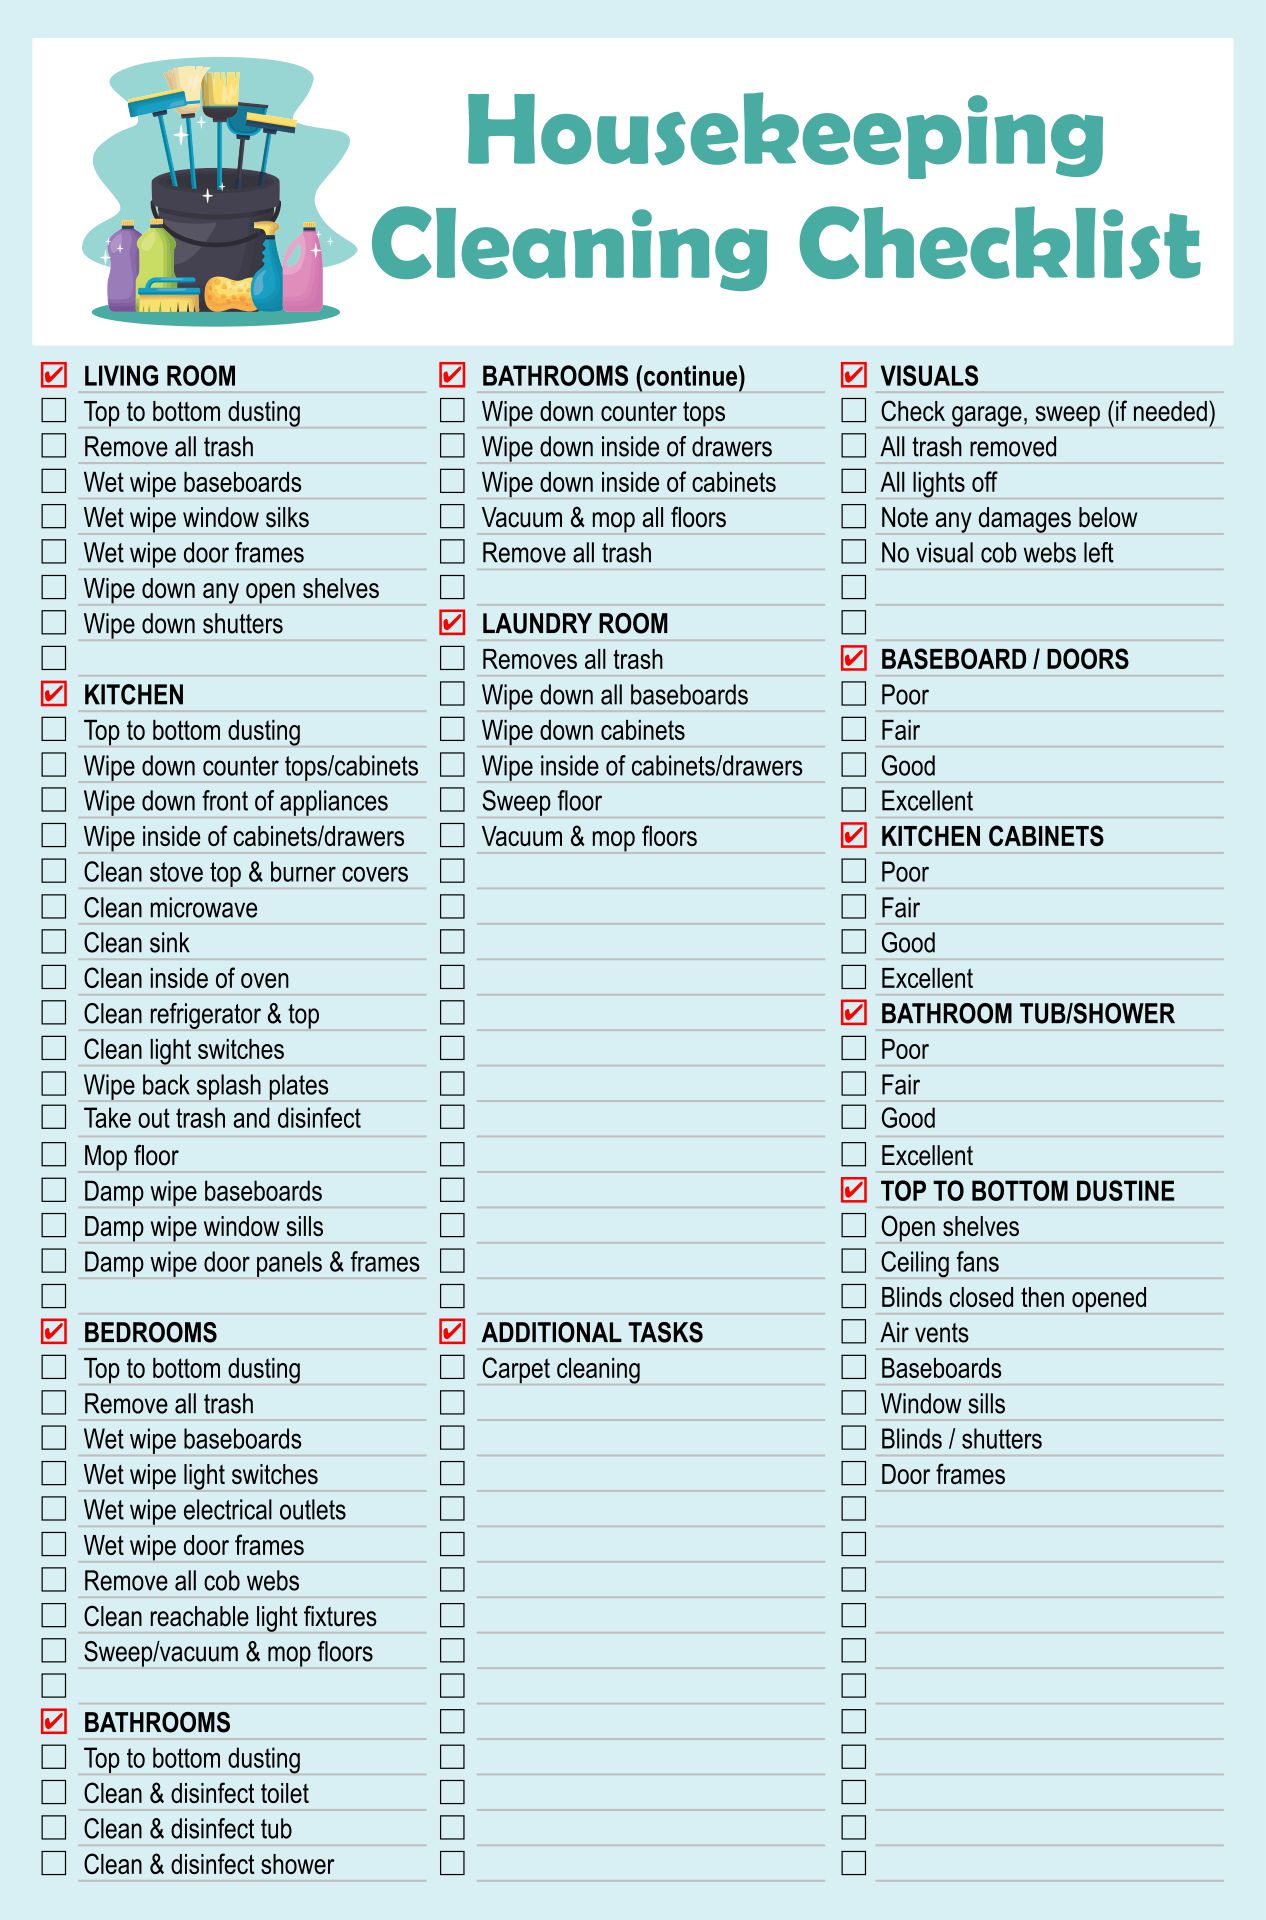 8 Best Images of Housekeeping Cleaning Checklist Printable